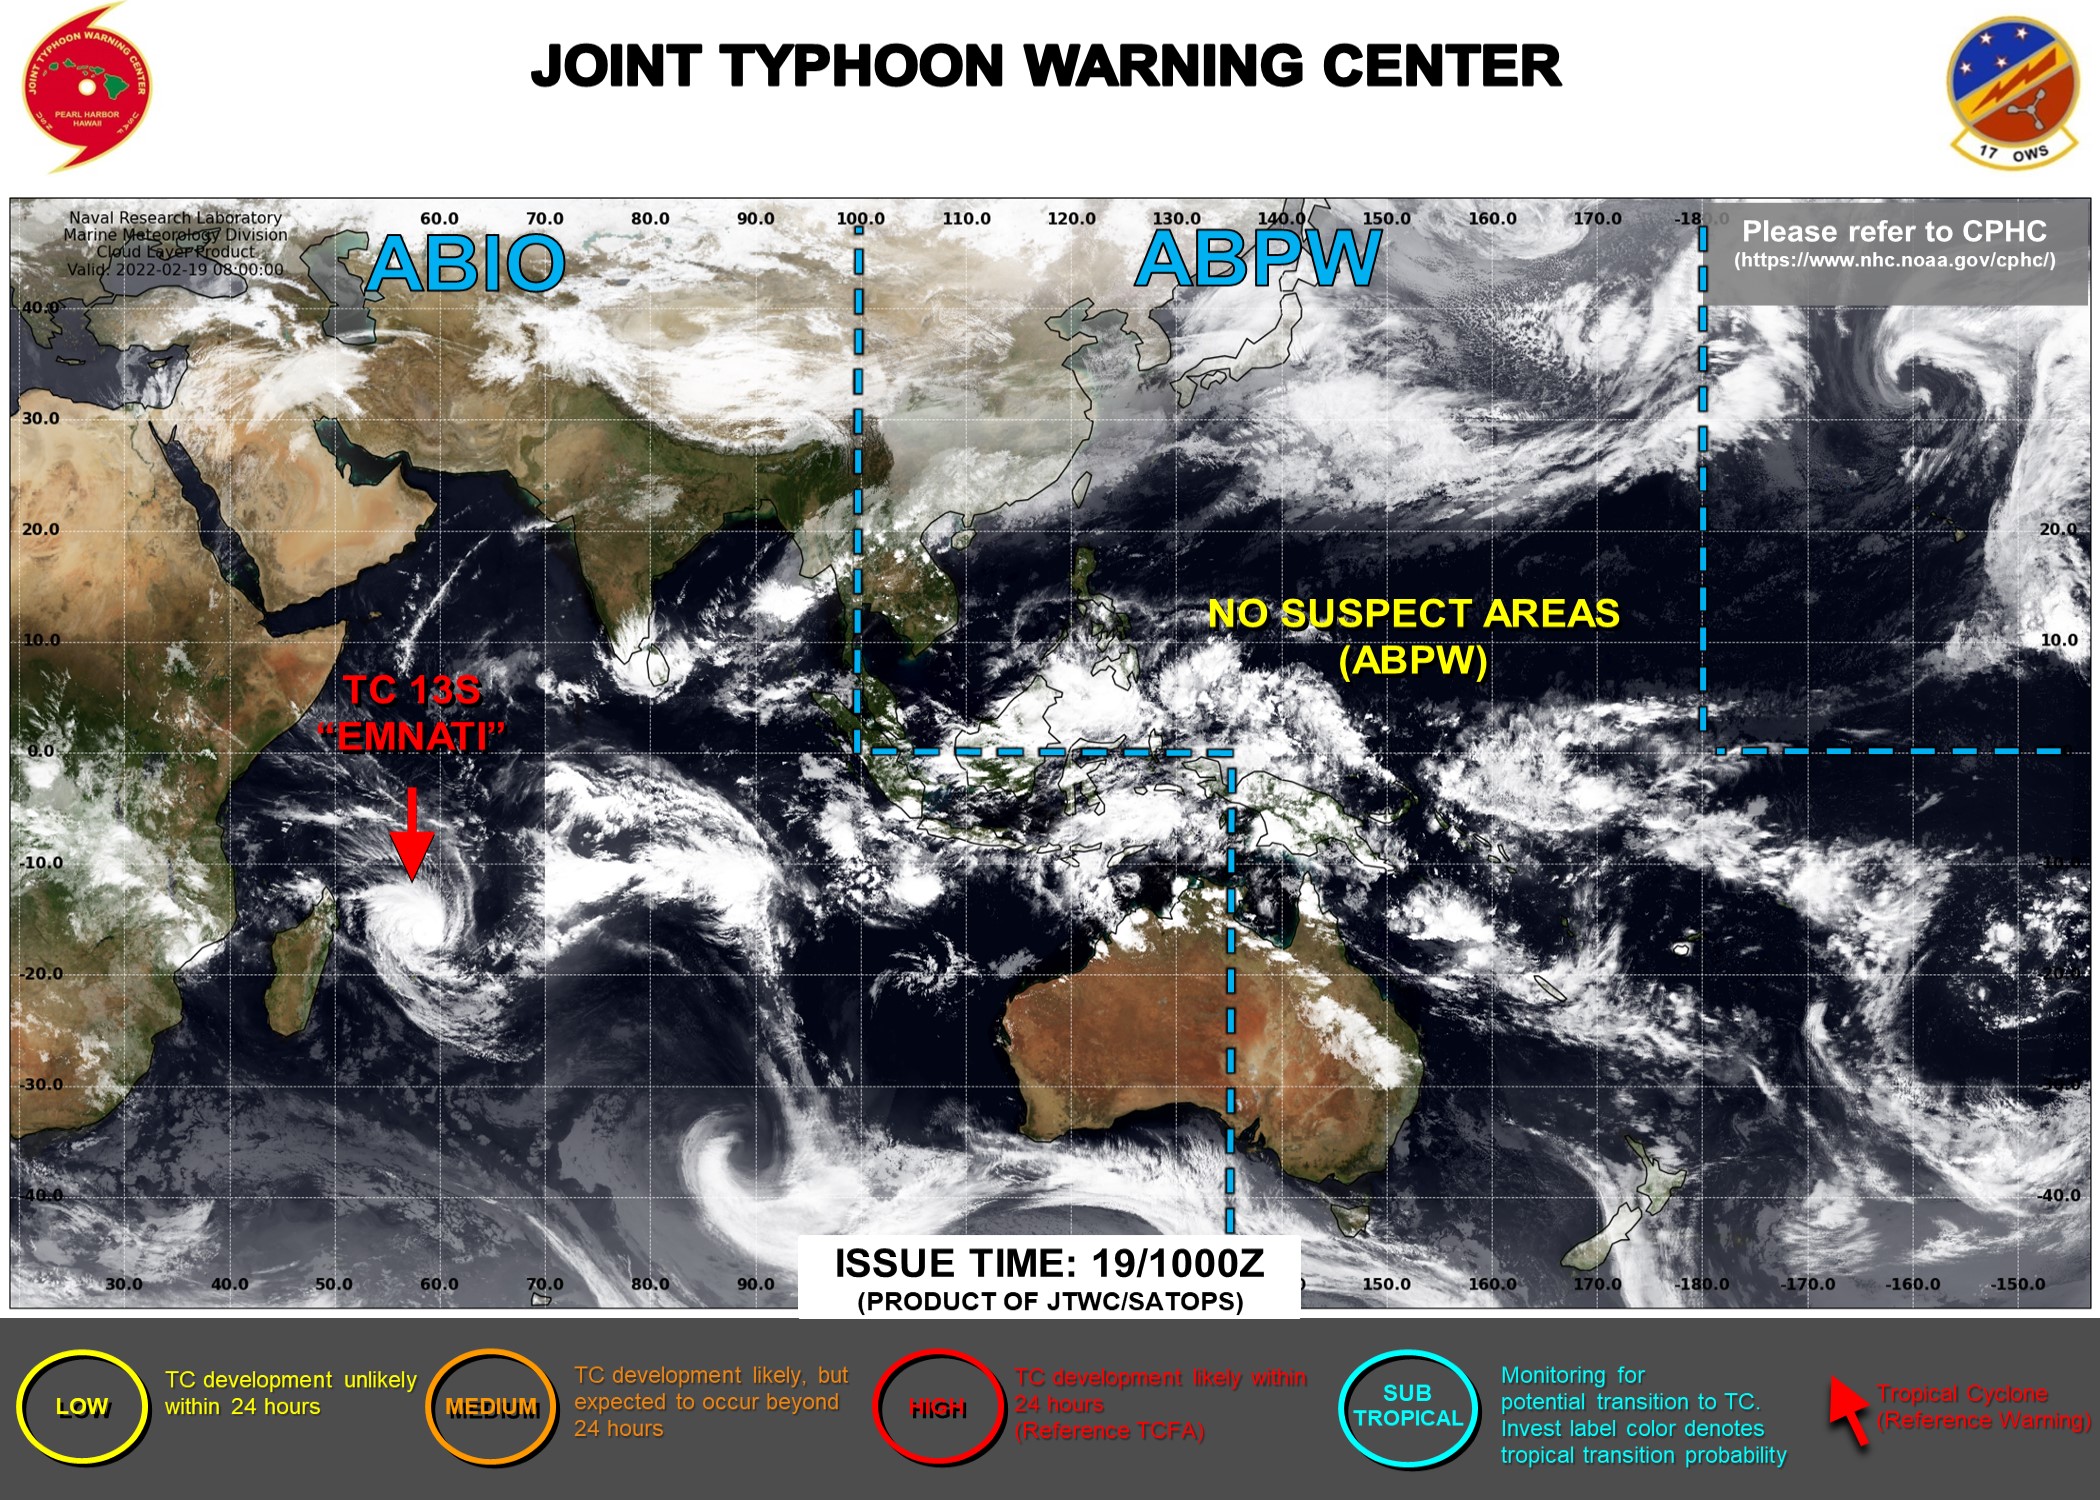 JTWC IS ISSUING 12HOURLY WARNINGS ON TC 13S(EMNATI) AND 3HOURLY SATELLITE BULLETINS ON TC 13S AND INVEST 97S(FEZILE).